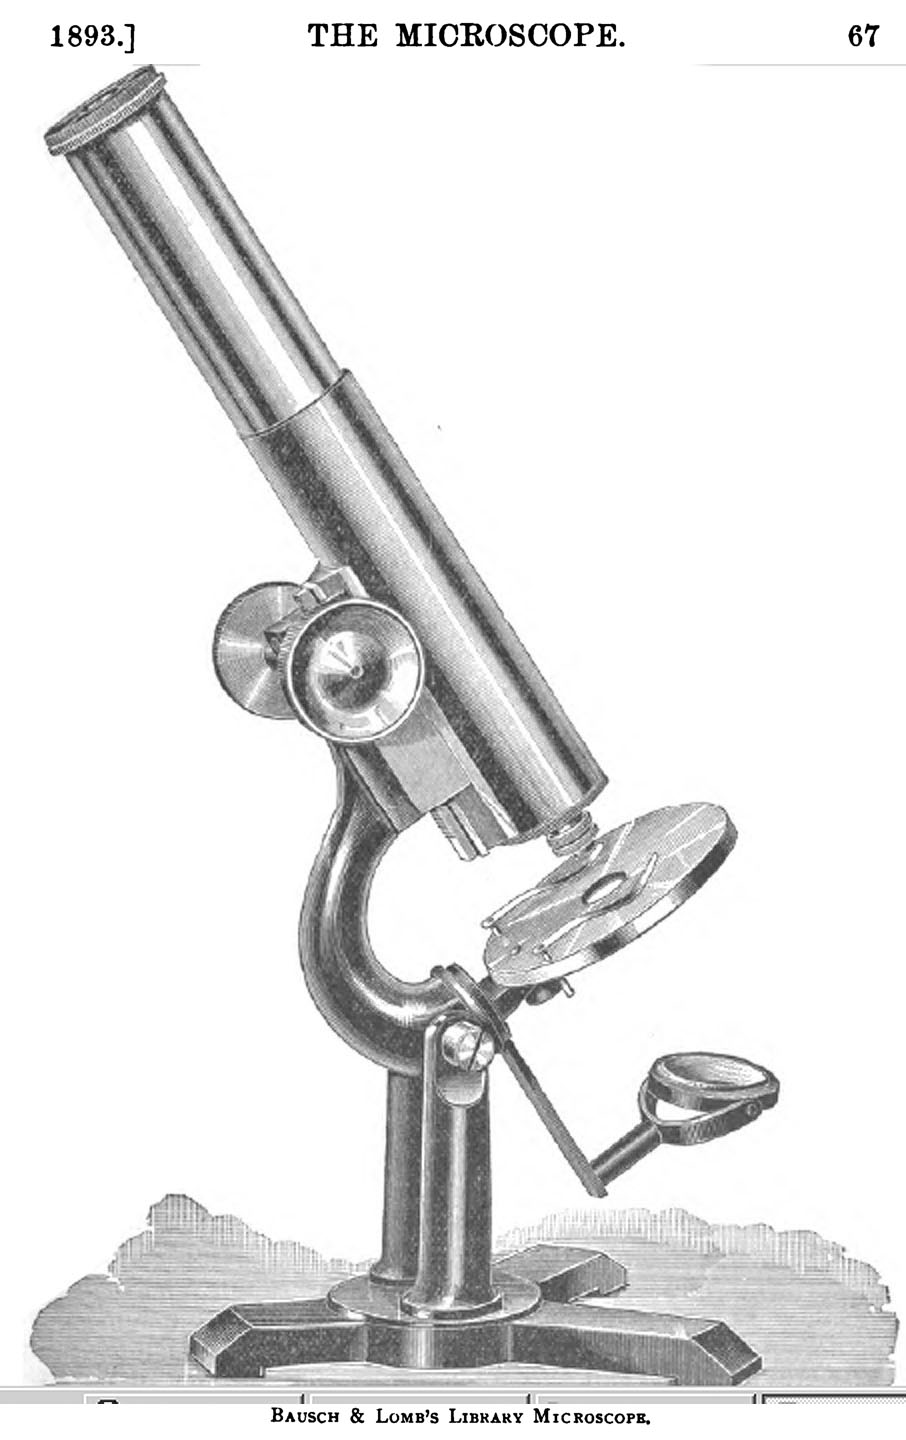 
engraving of later version of Library microscope